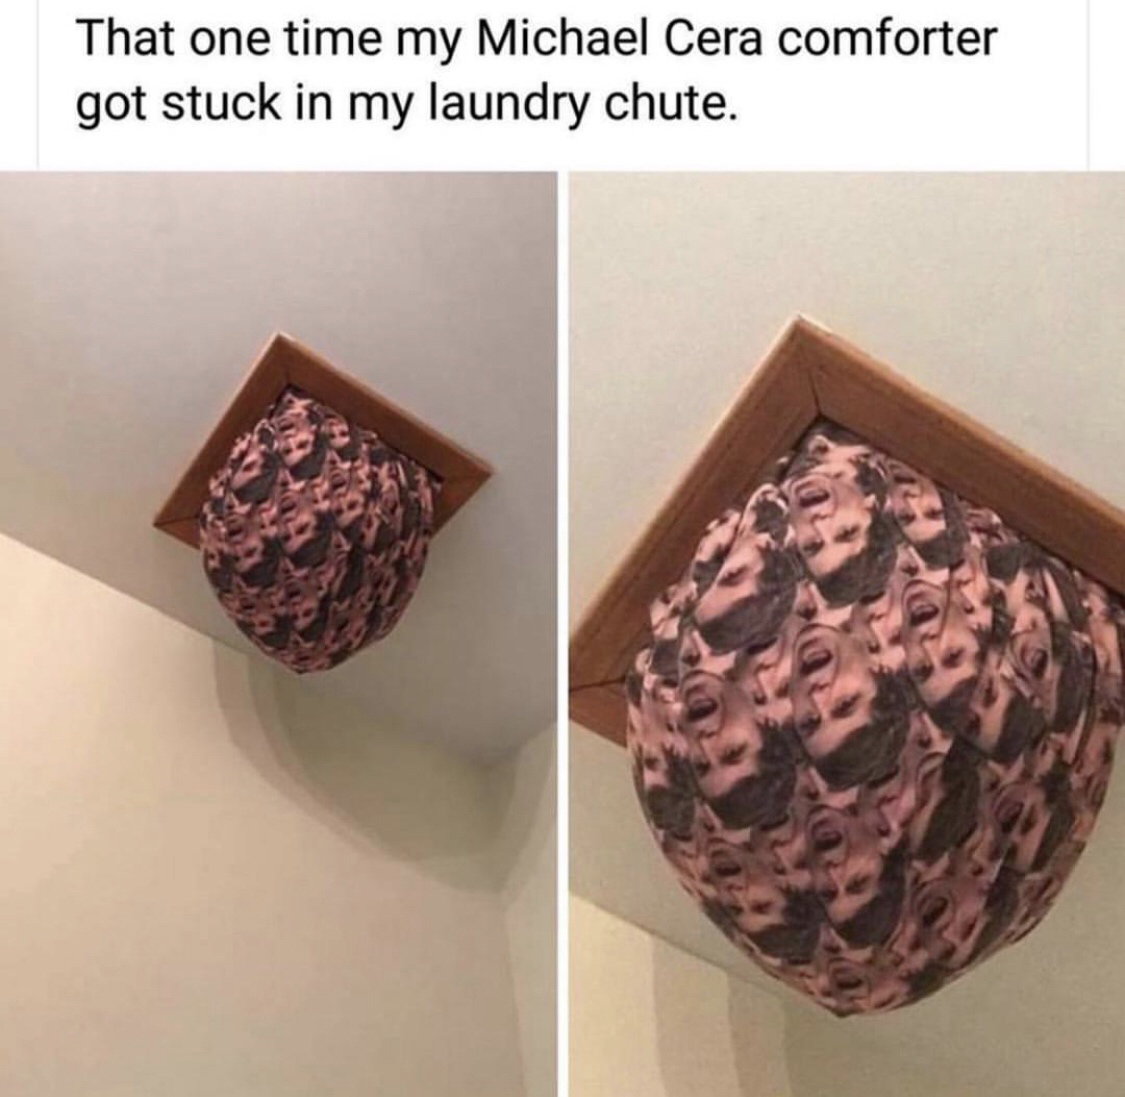 michael cera comforter - That one time my Michael Cera comforter got stuck in my laundry chute.